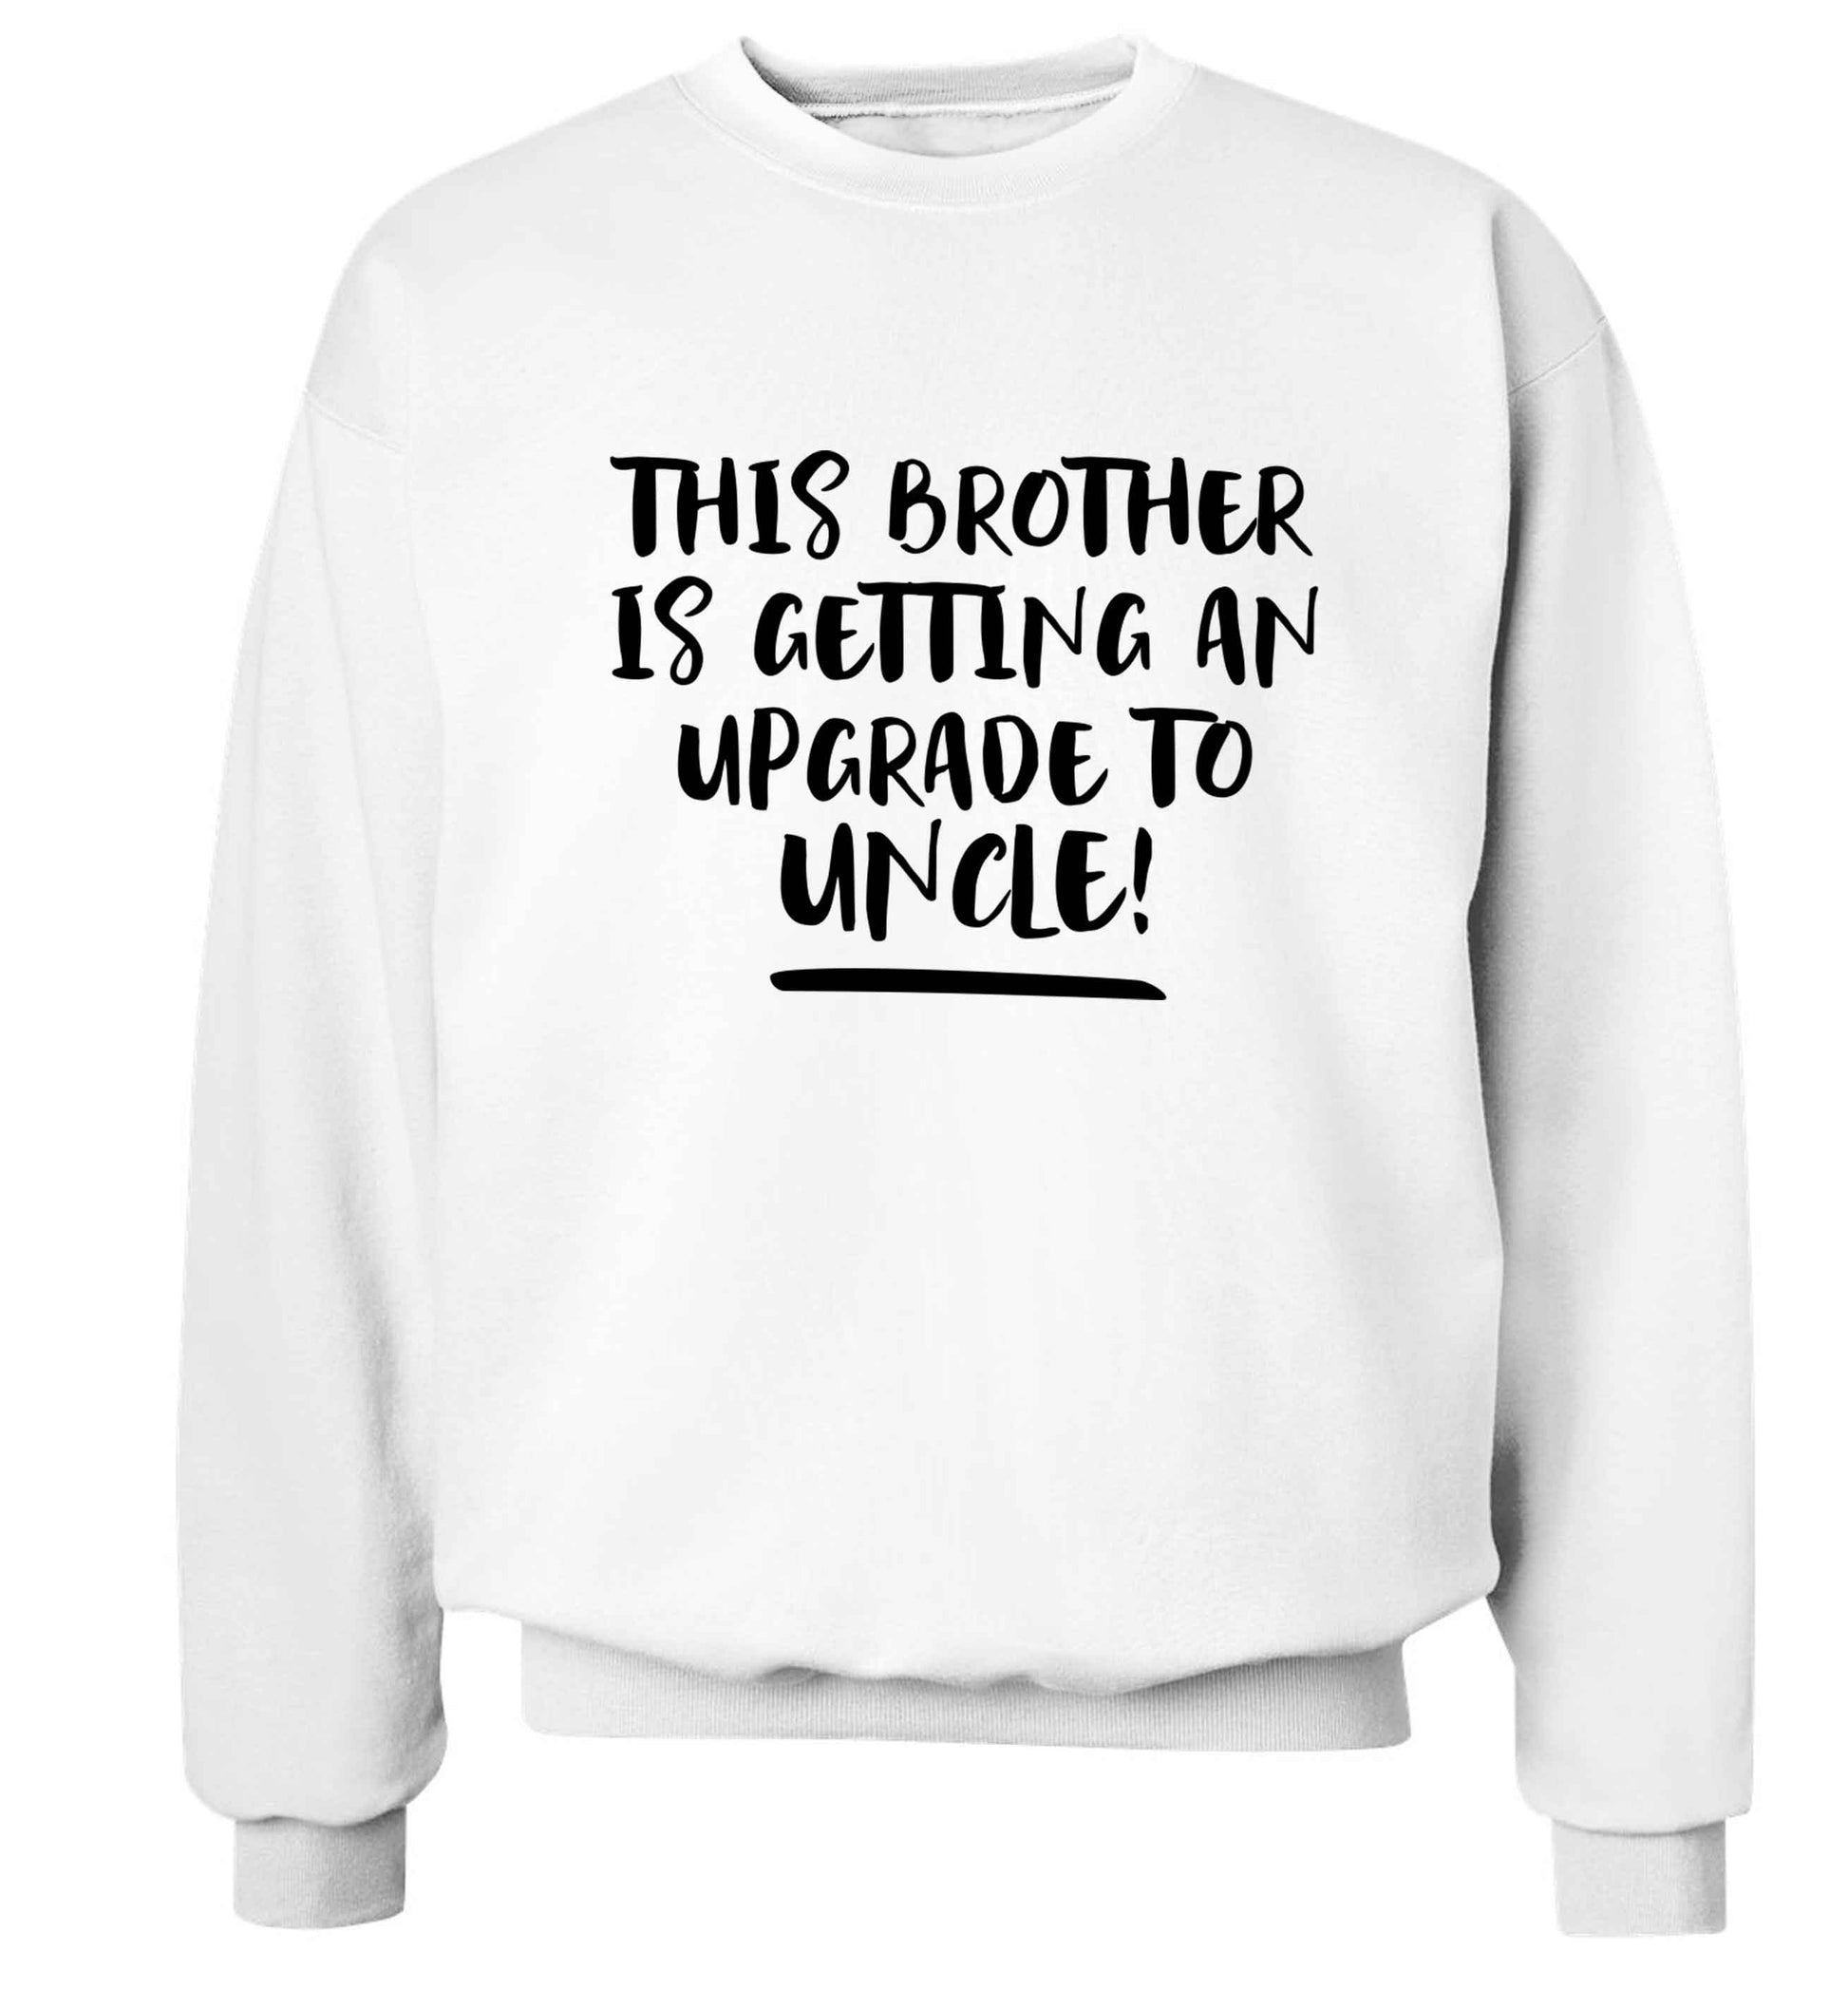 This brother is getting an upgrade to uncle! Adult's unisex white Sweater 2XL